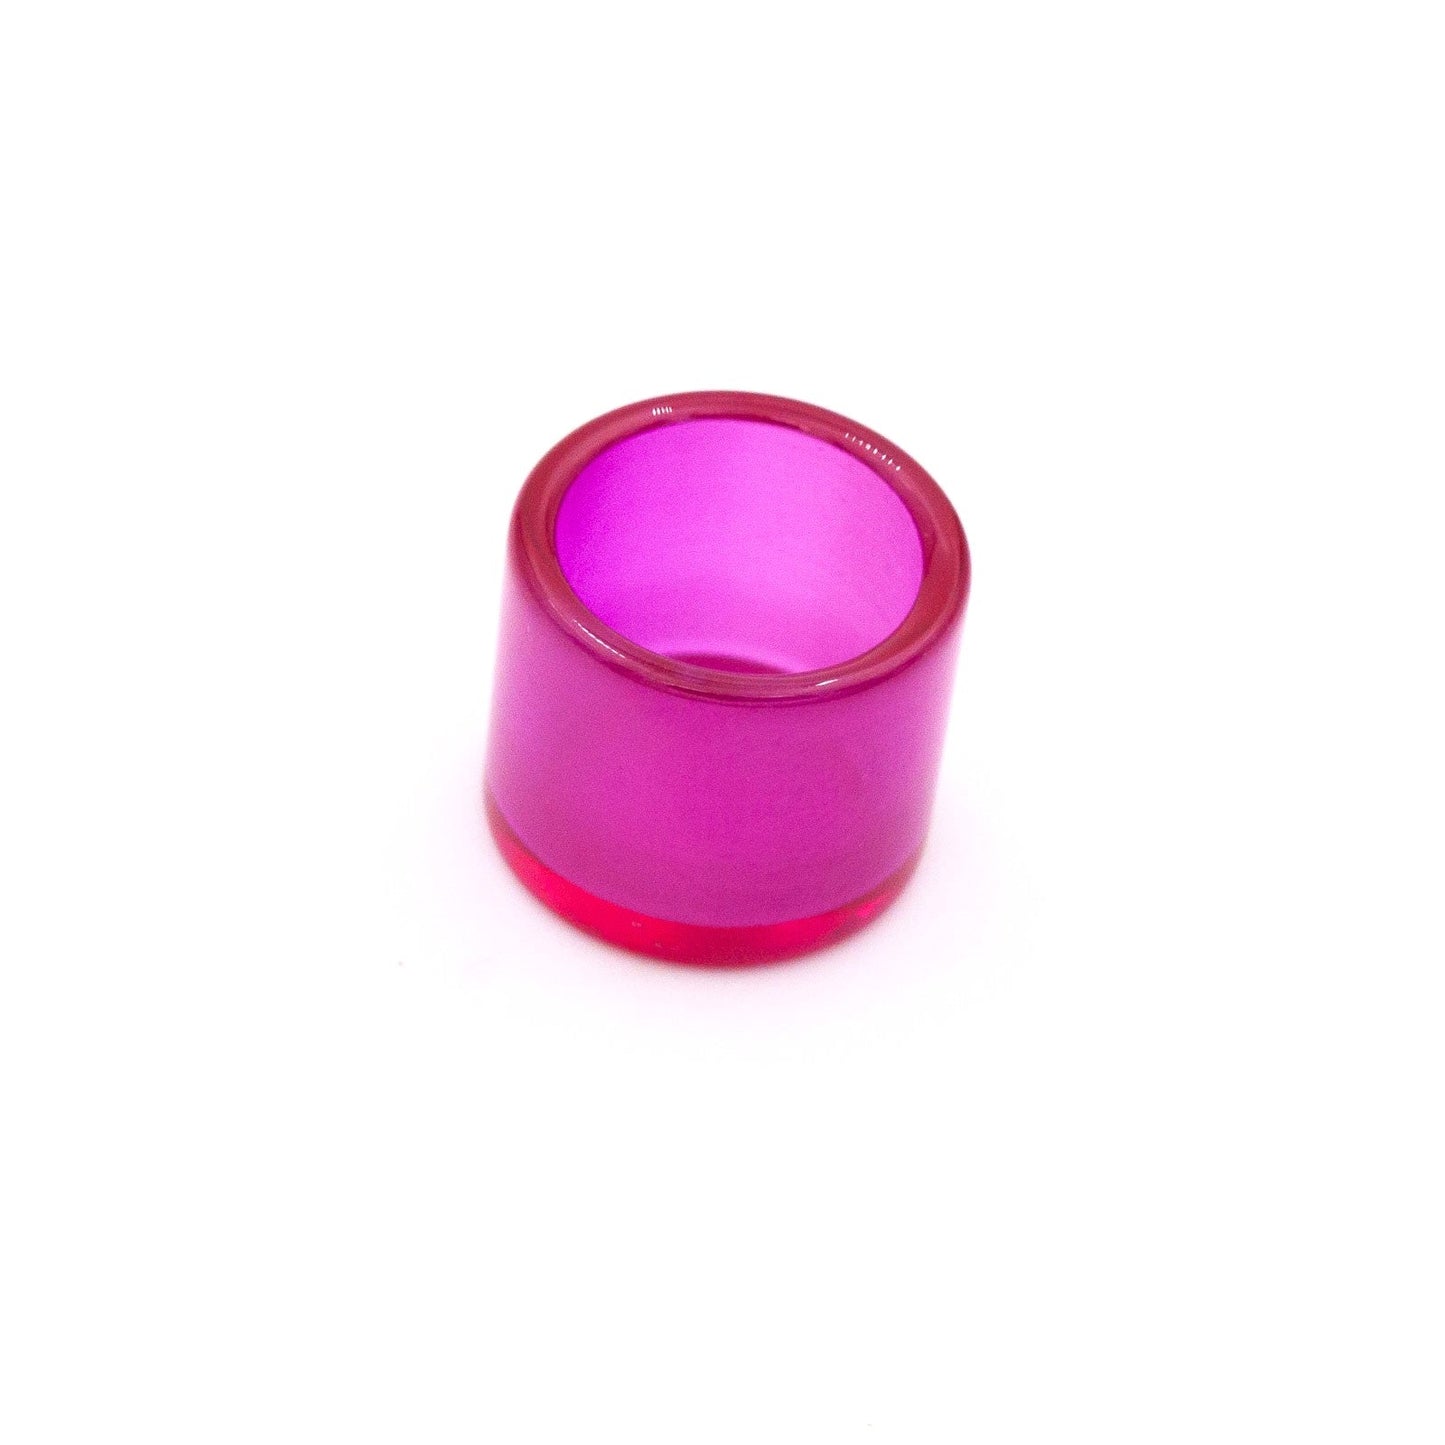 The Stash Shack Dab Accessories 25mm Ruby Banger Insert